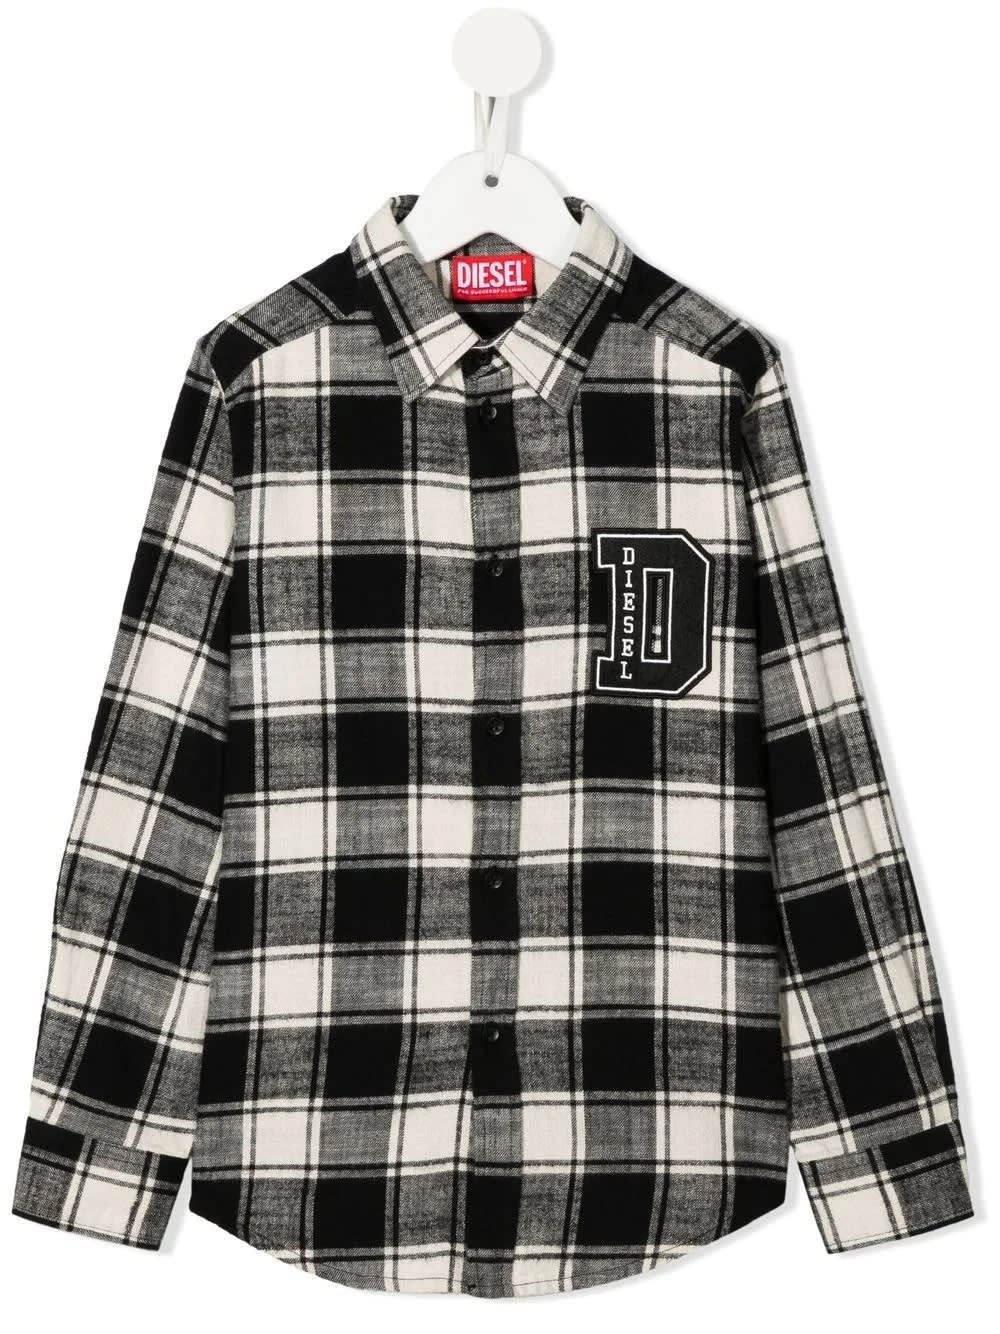 Diesel Kids White Shirt With Check Pattern And Dsl Brave Print